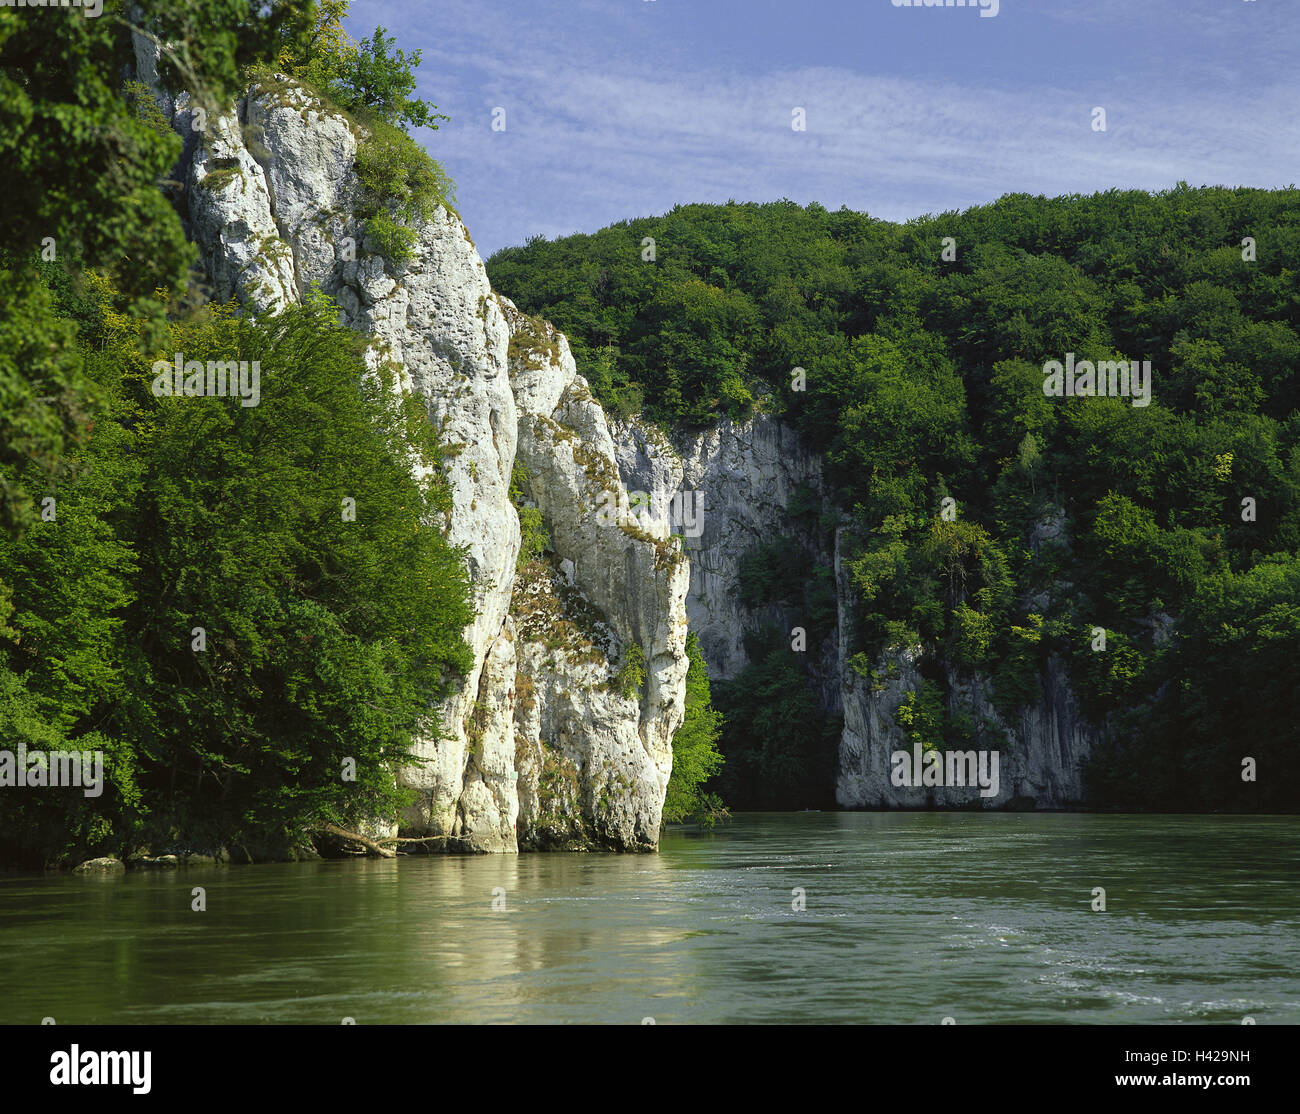 Germany, Bavaria, world castle, Danube breakthrough, South Germany, mountains, rock, Steilfelsen, river, waters, destination, place of interest, nature, breakthrough, cliff faces, deserted, Stock Photo